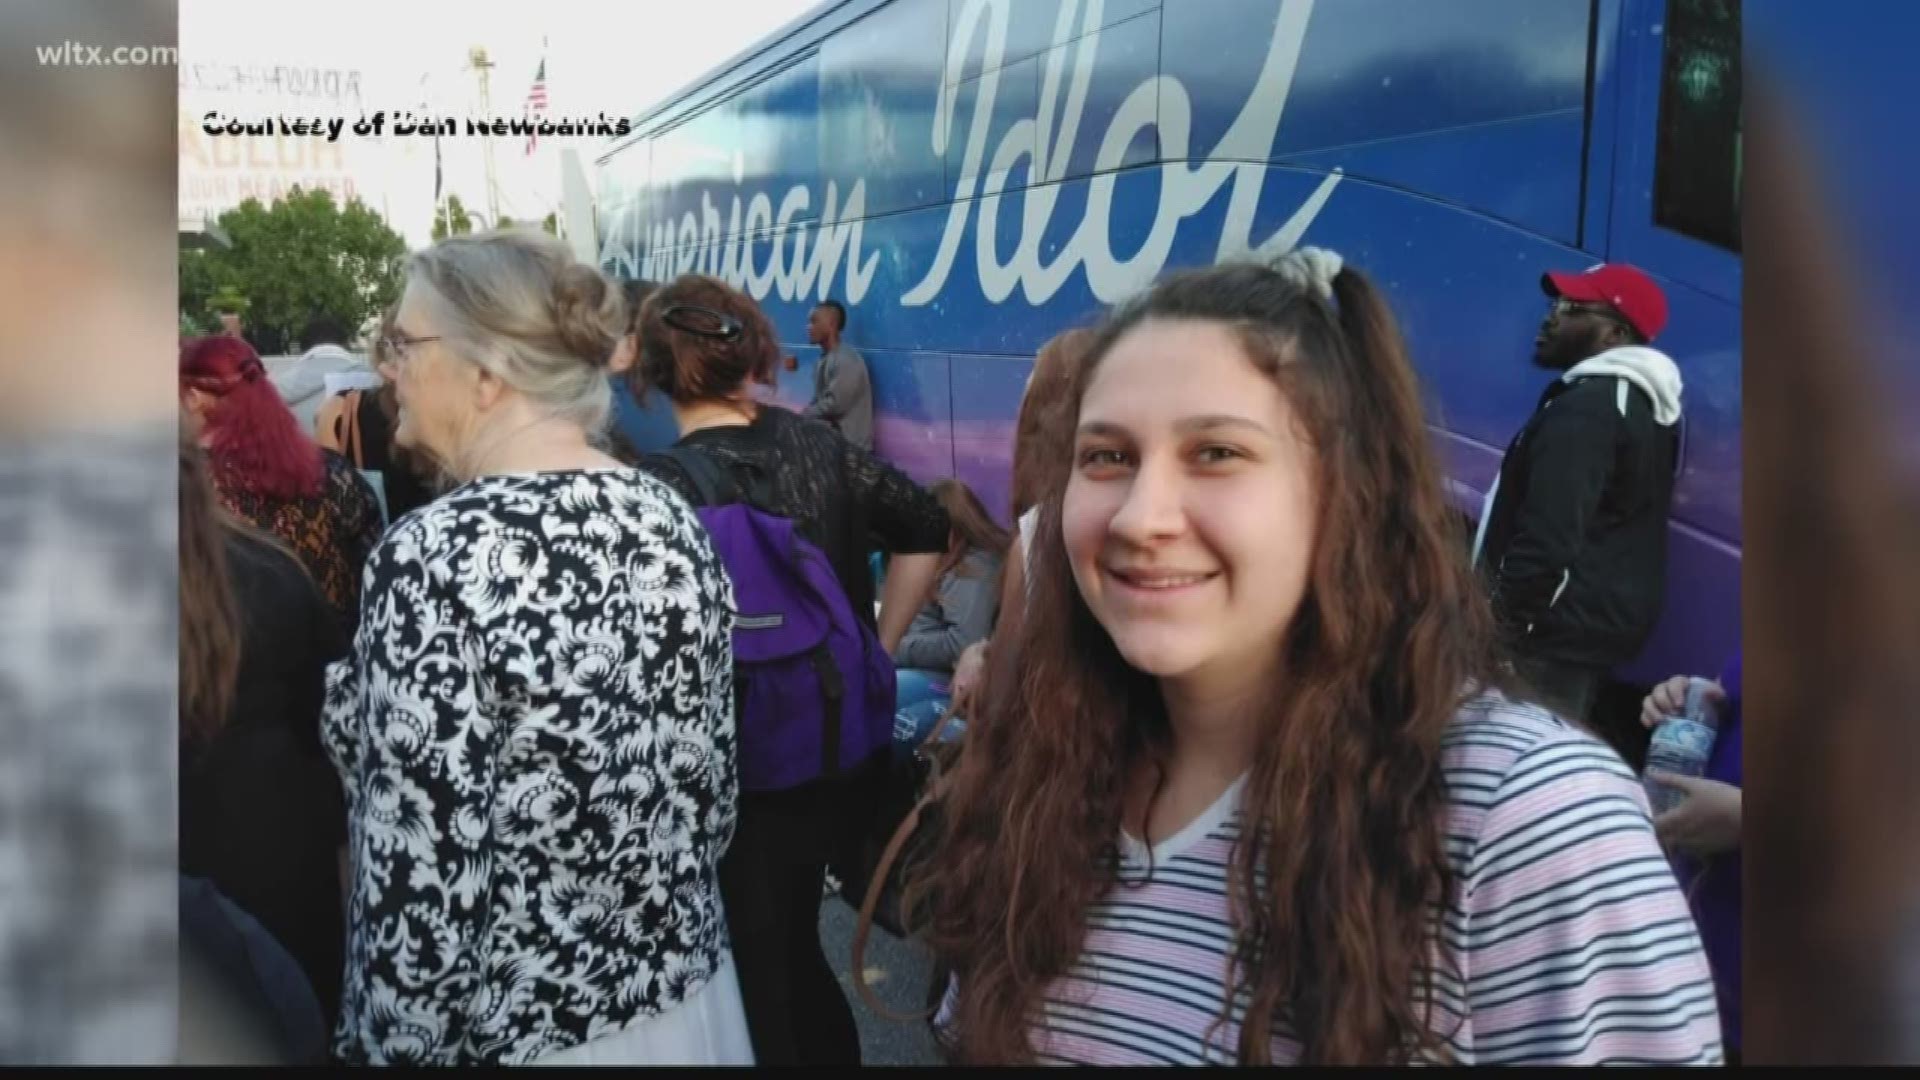 Early this morning, one Irmo teenager and her dad made the trip downtown Columbia to take advantage of an opportunity of a life-time: auditioning for American Idol.